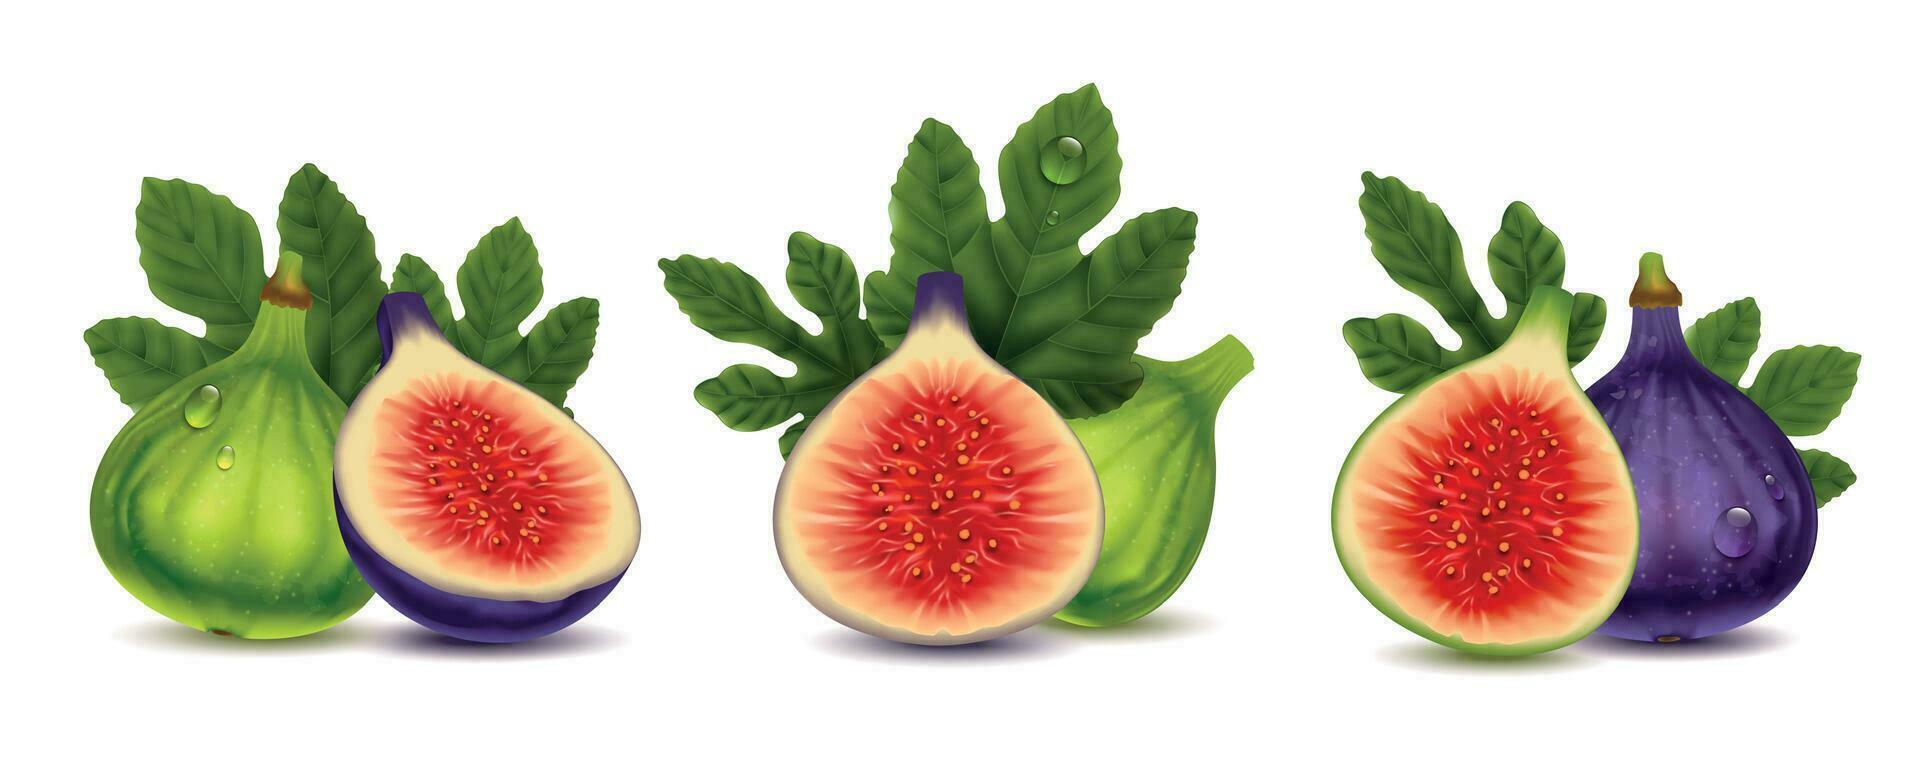 Figs Fruit Realistic Compositions Set vector